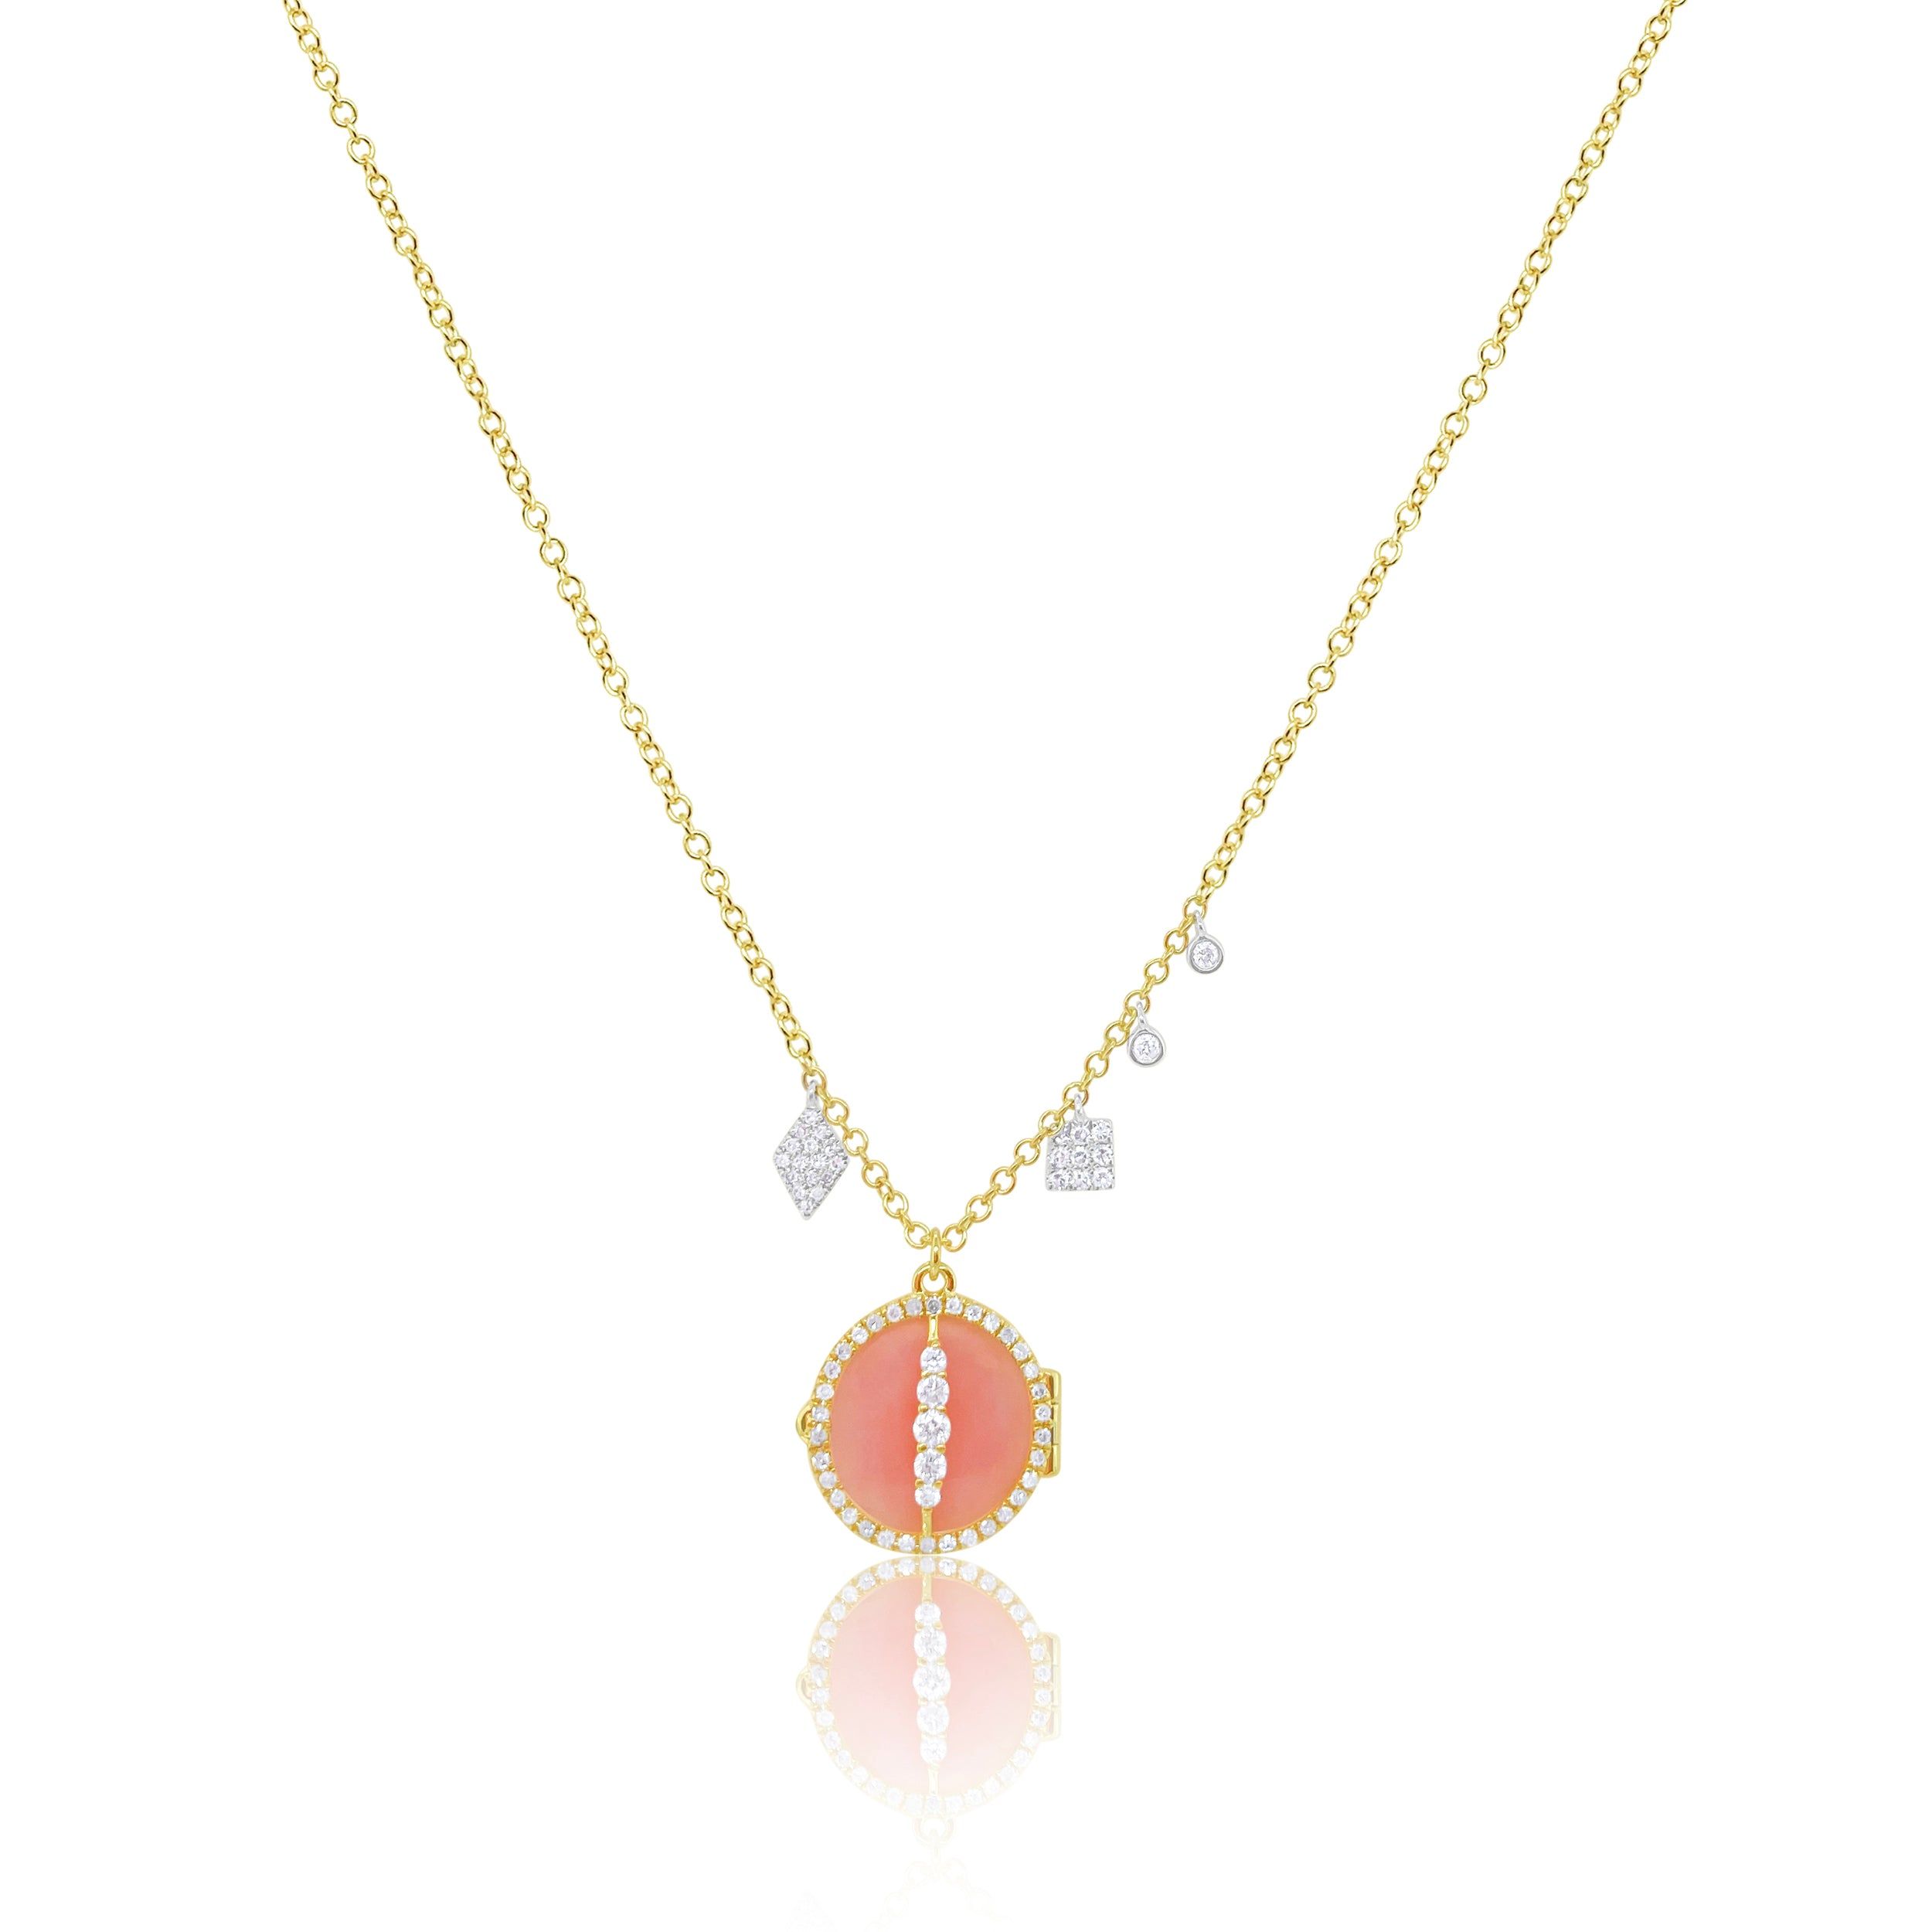 Meira T 14kt Gold 0.29 CTW Pink Opal Locket Necklace with Diamond Charms